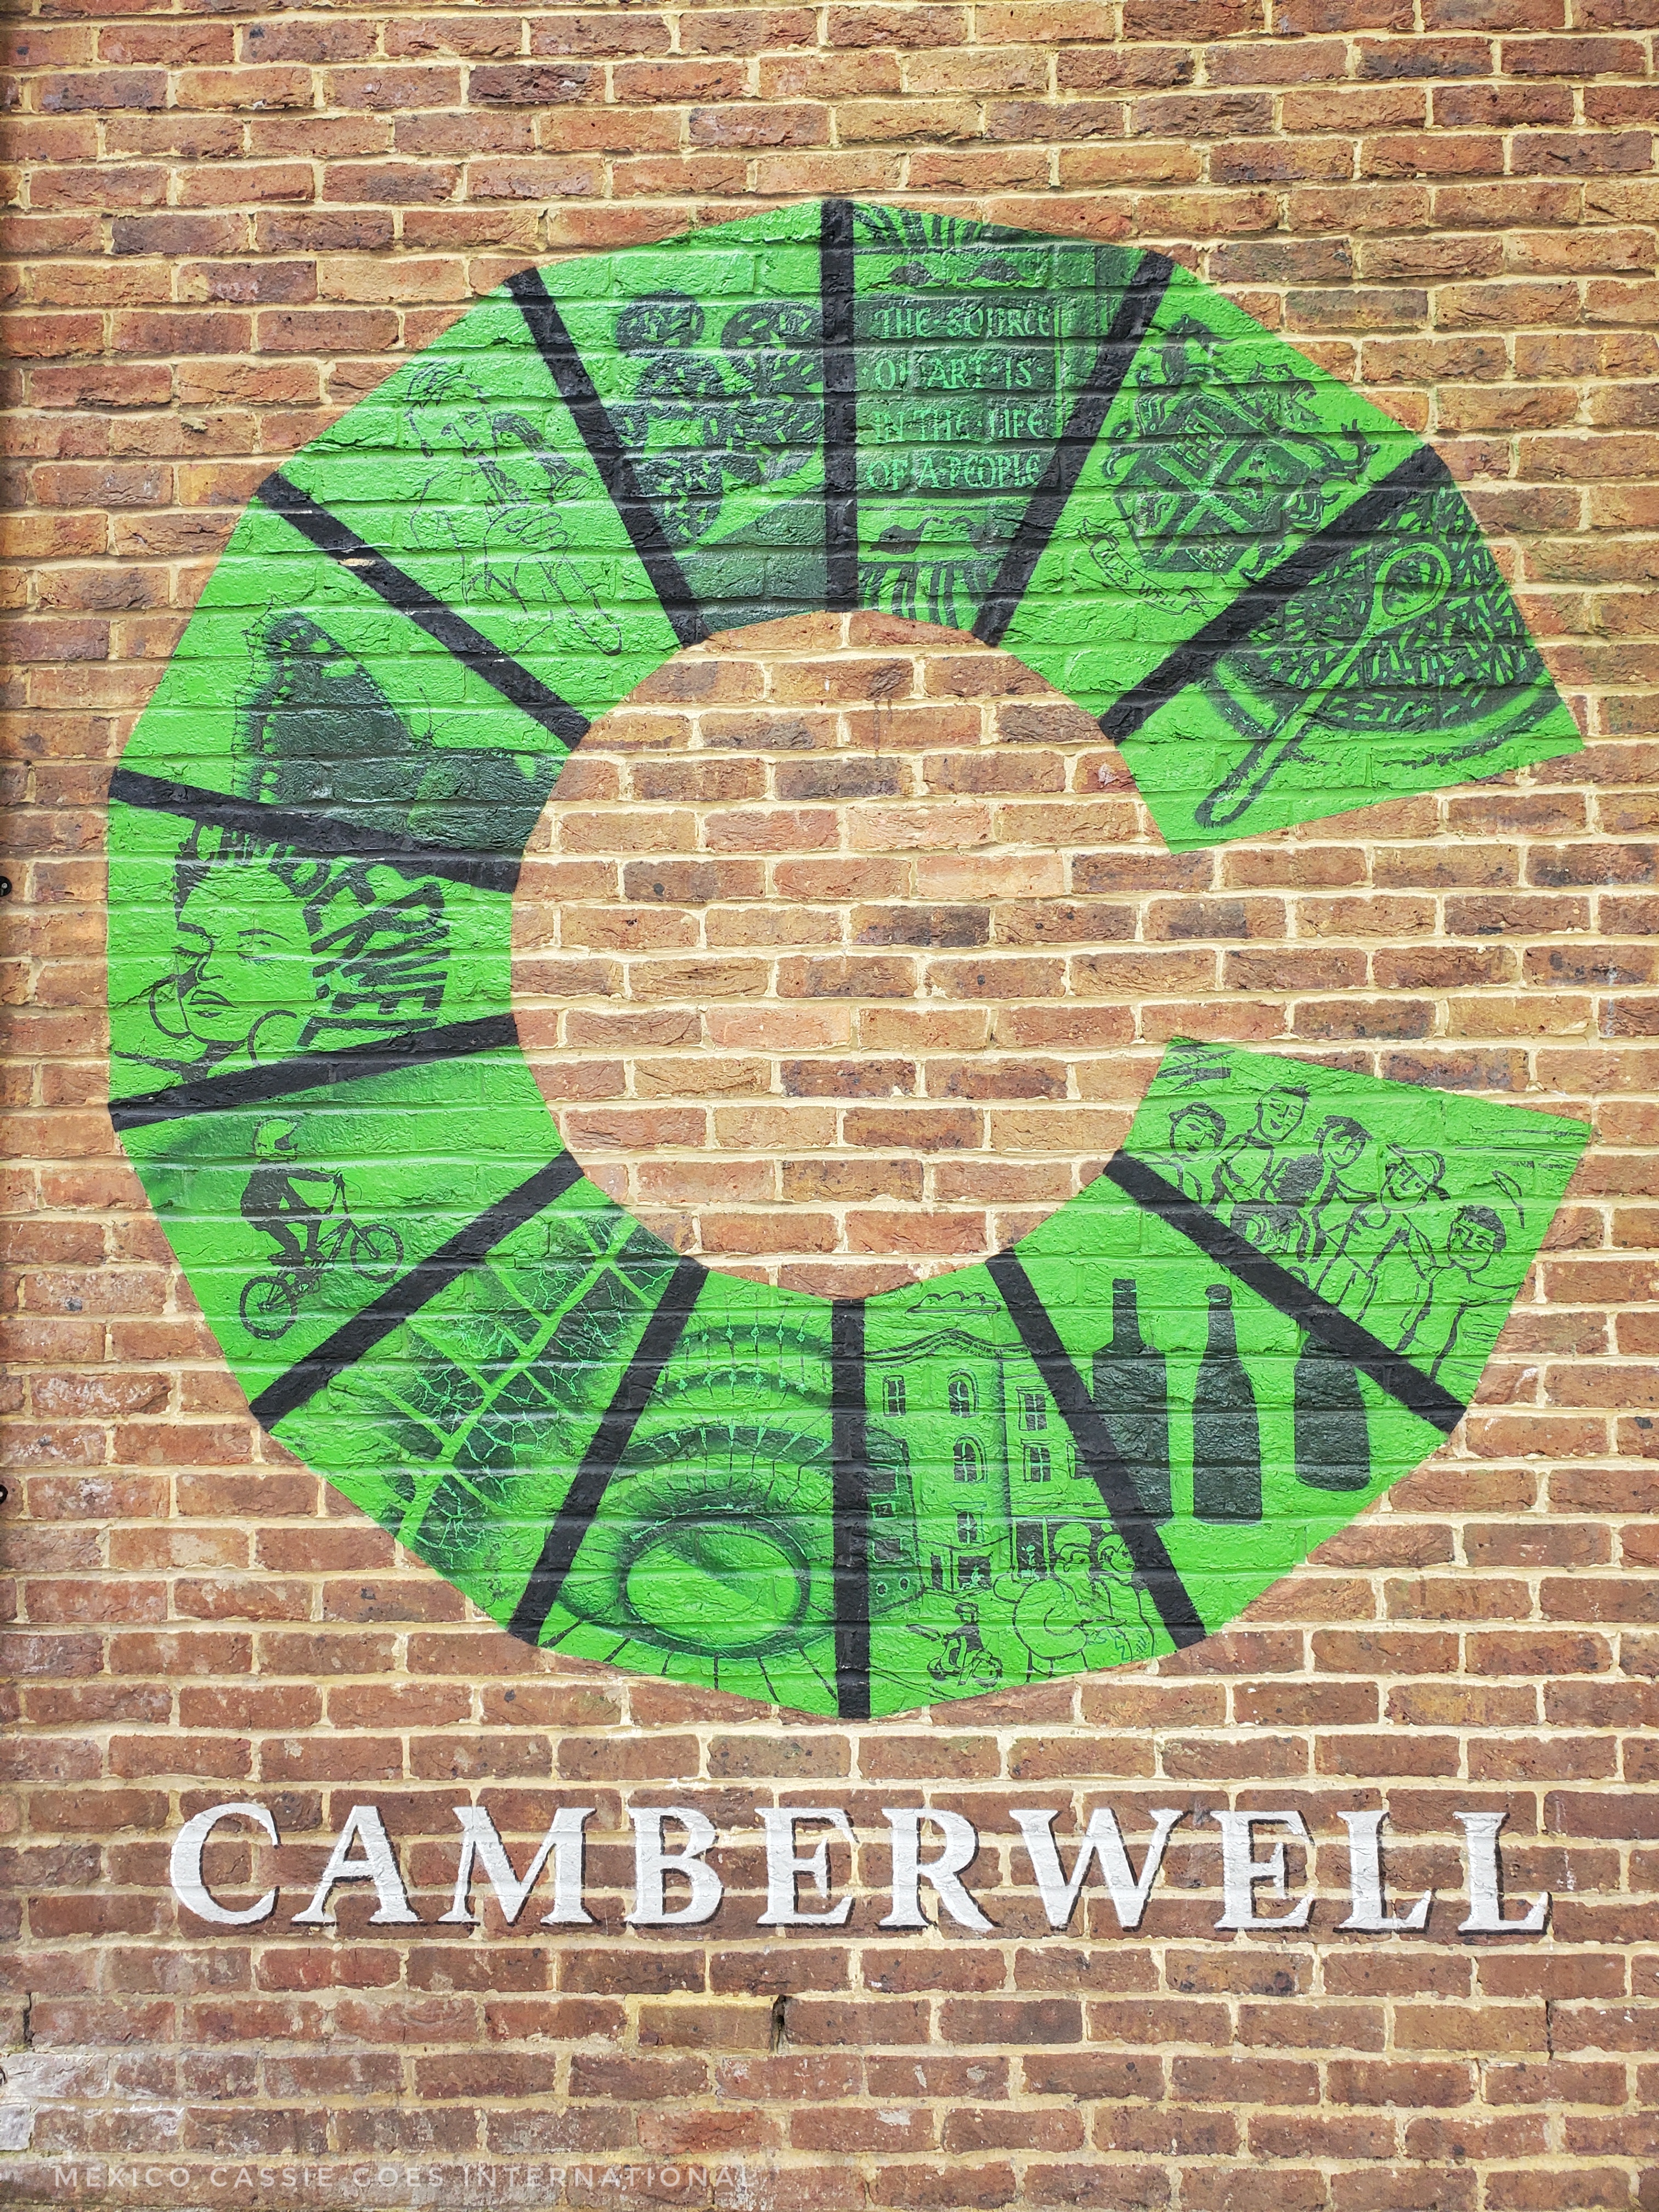 Green C painted on brick wall. Camberwell written underneath in white capitals. C is split into13 sections each with its own picture of something to do with Camberwell